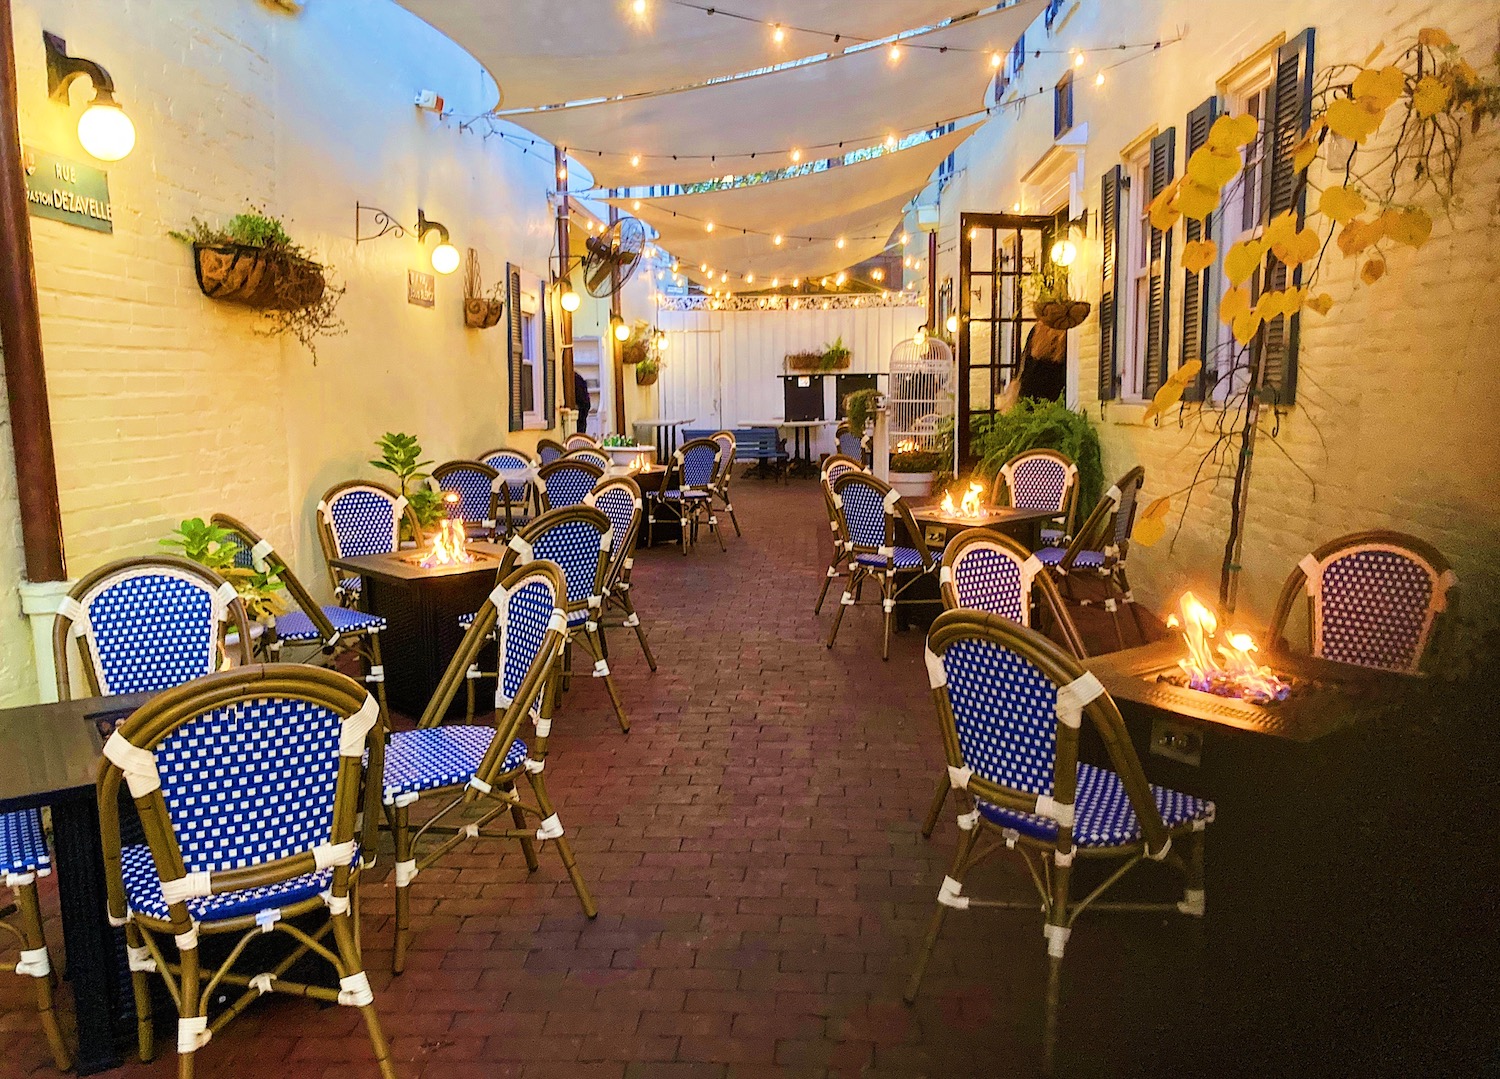 Patio area with blue chairs and string lights